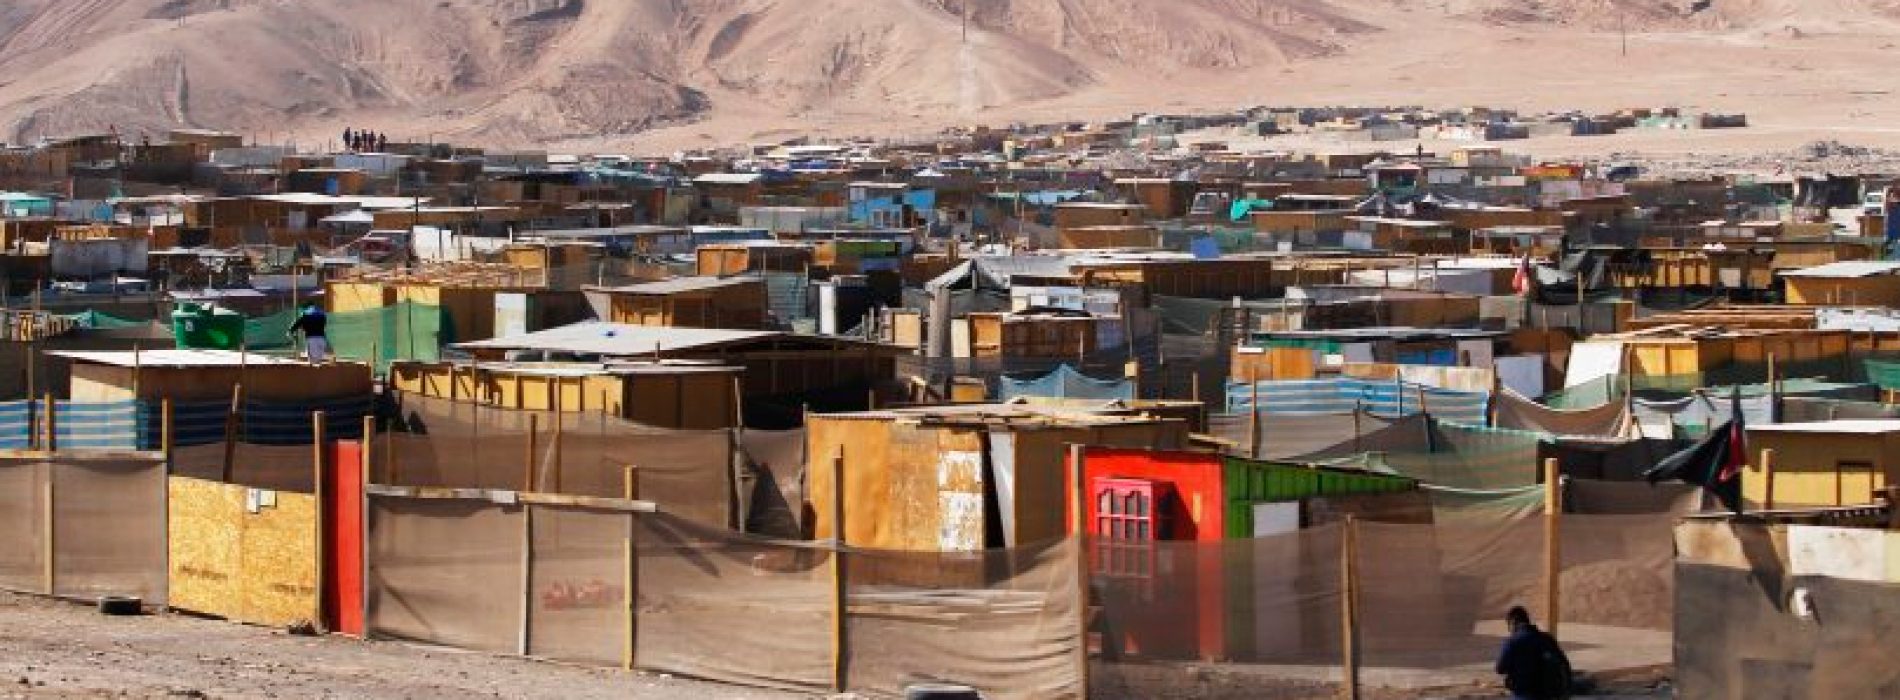 A shanty town neighborhood in <span style="font-weight: 400;">Alto Hospicio. </span>Credit: SBBMCH Chile; Eco Fibra